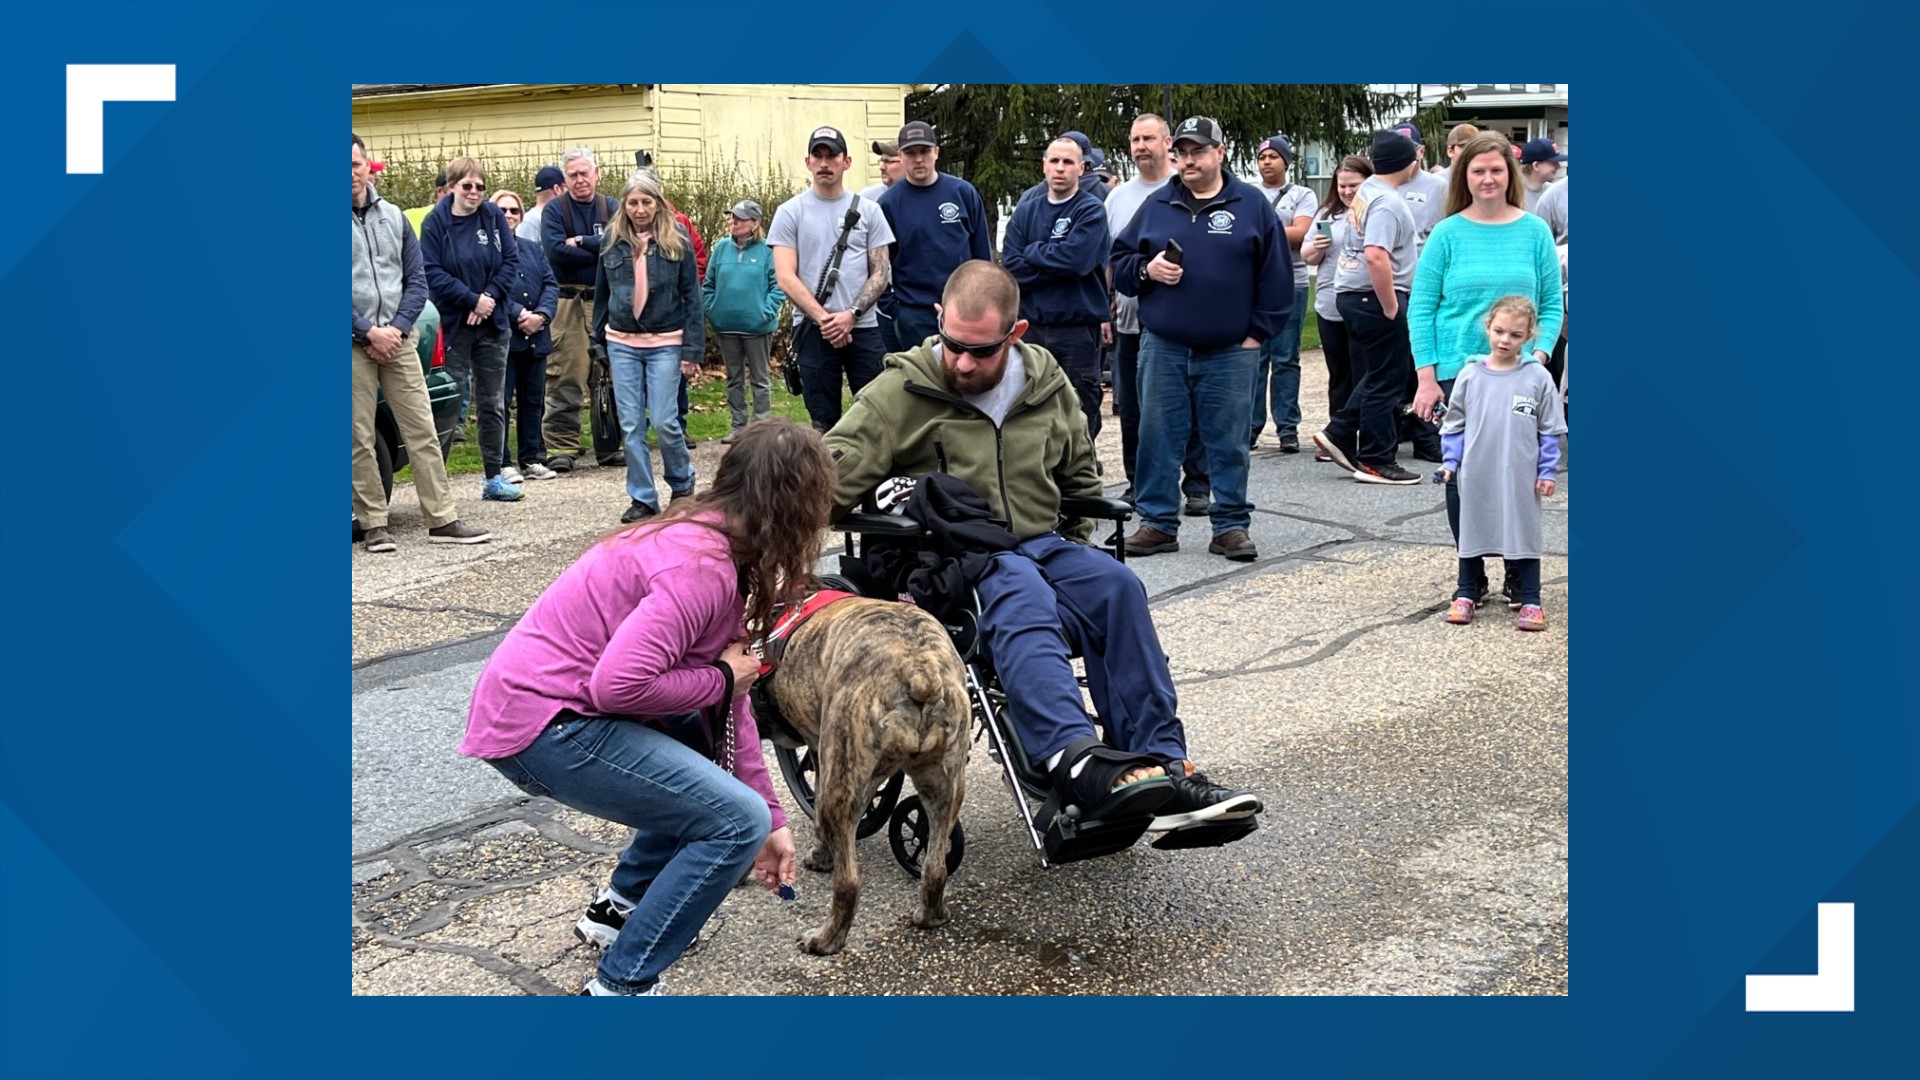 After spending two months recovering from serious injuries he sustained from a fire, Middletown firefighter Shawn Menear was released from the hospital on April 6.